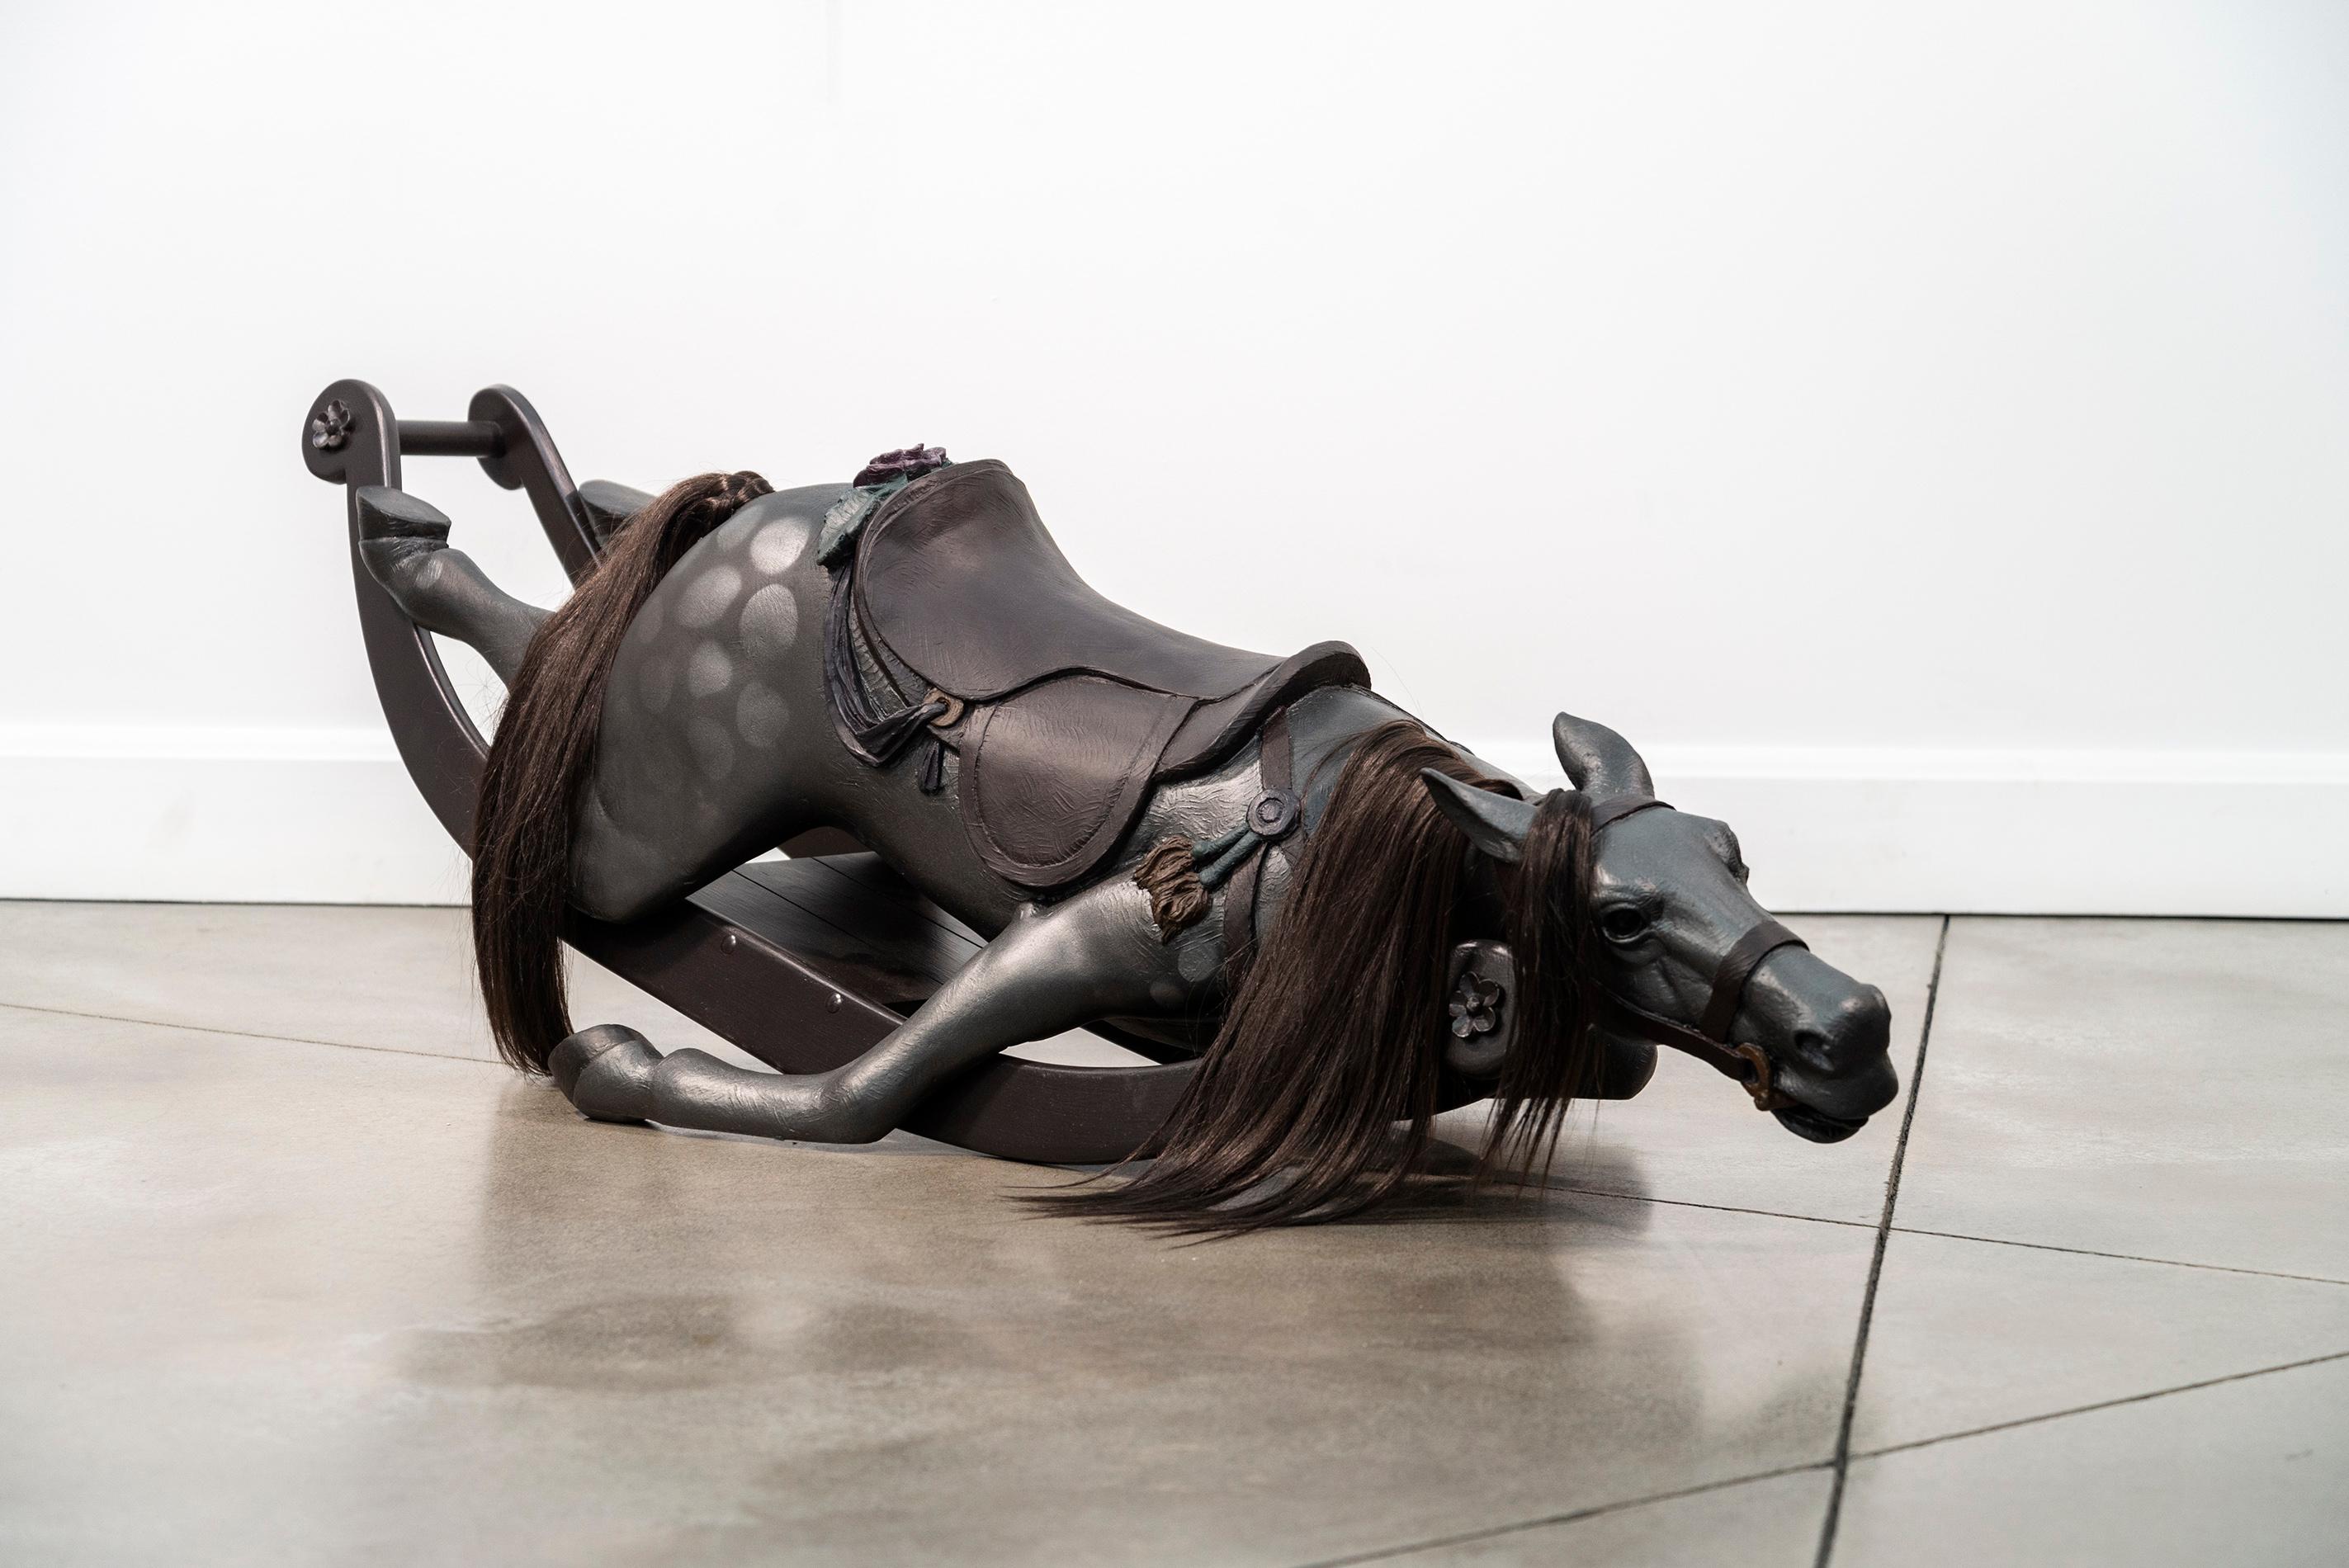 It is a powerful image—at once compelling and provocative—an old-fashioned rocking horse, collapsed. This is the work of Nicholas Crombach.

The Kingston based artist creates sculptures from a variety of cast mediums including bronze and resin. This